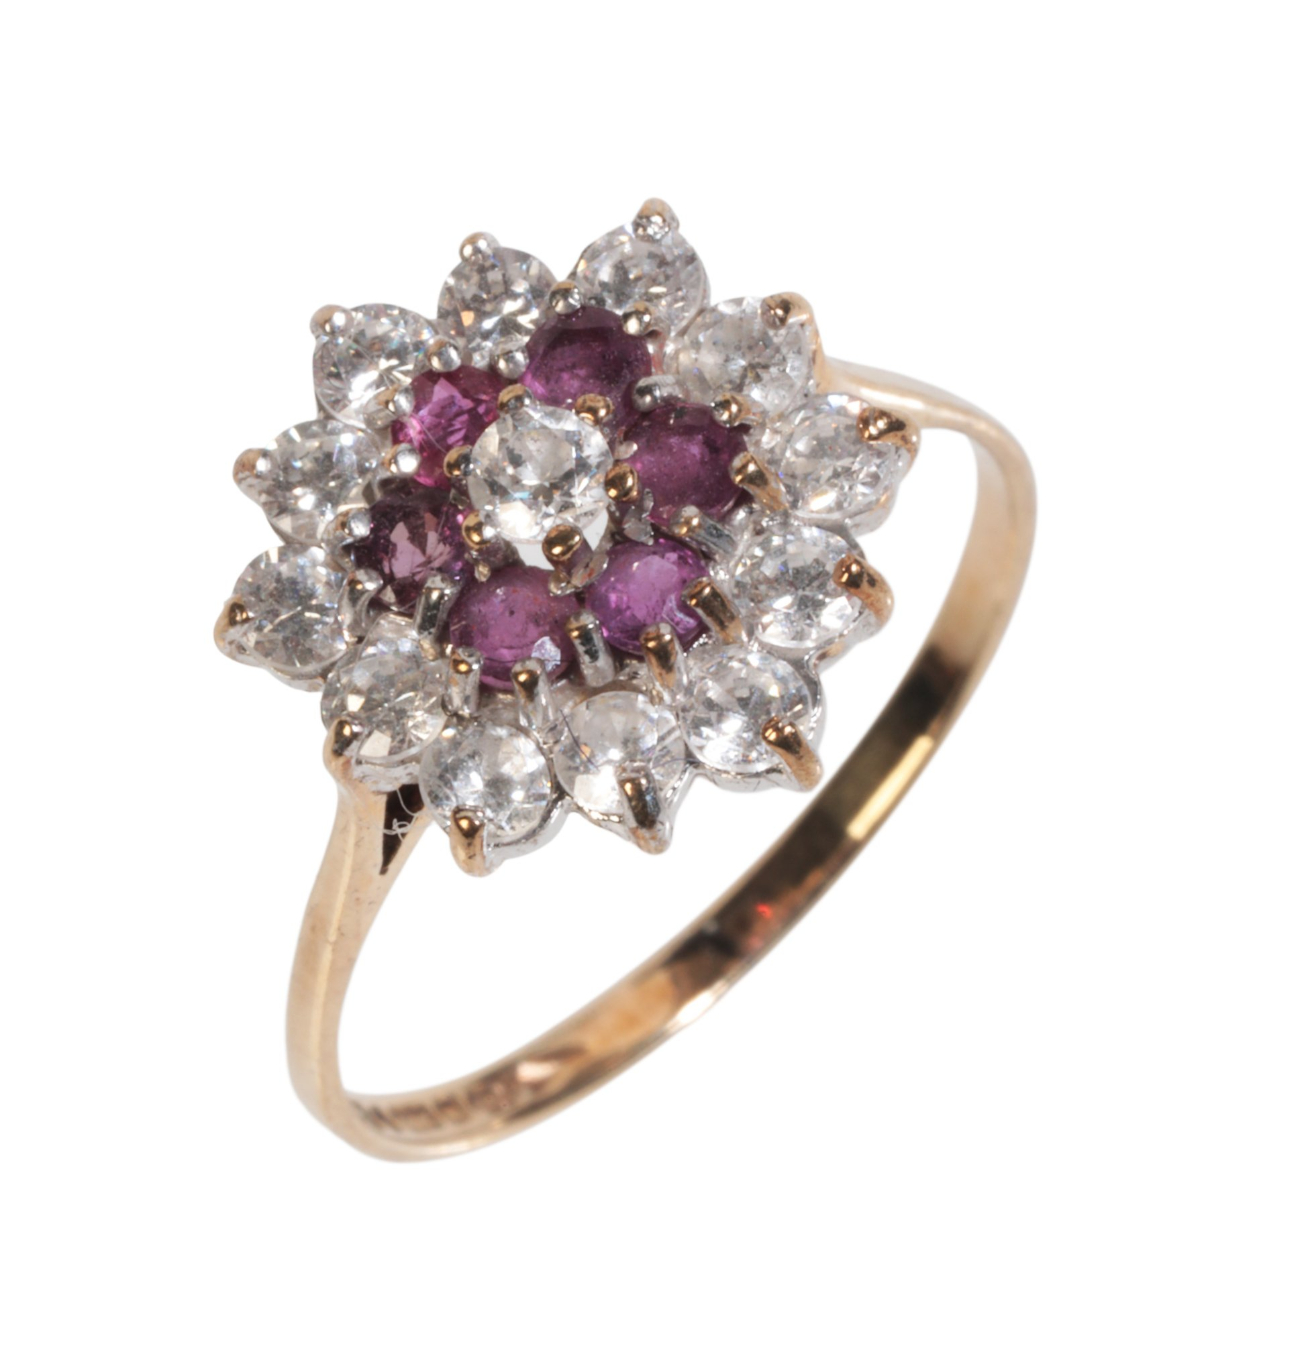 A GLASS-FILLED RUBY AND WHITE GEMSTONE CLUSTER RING